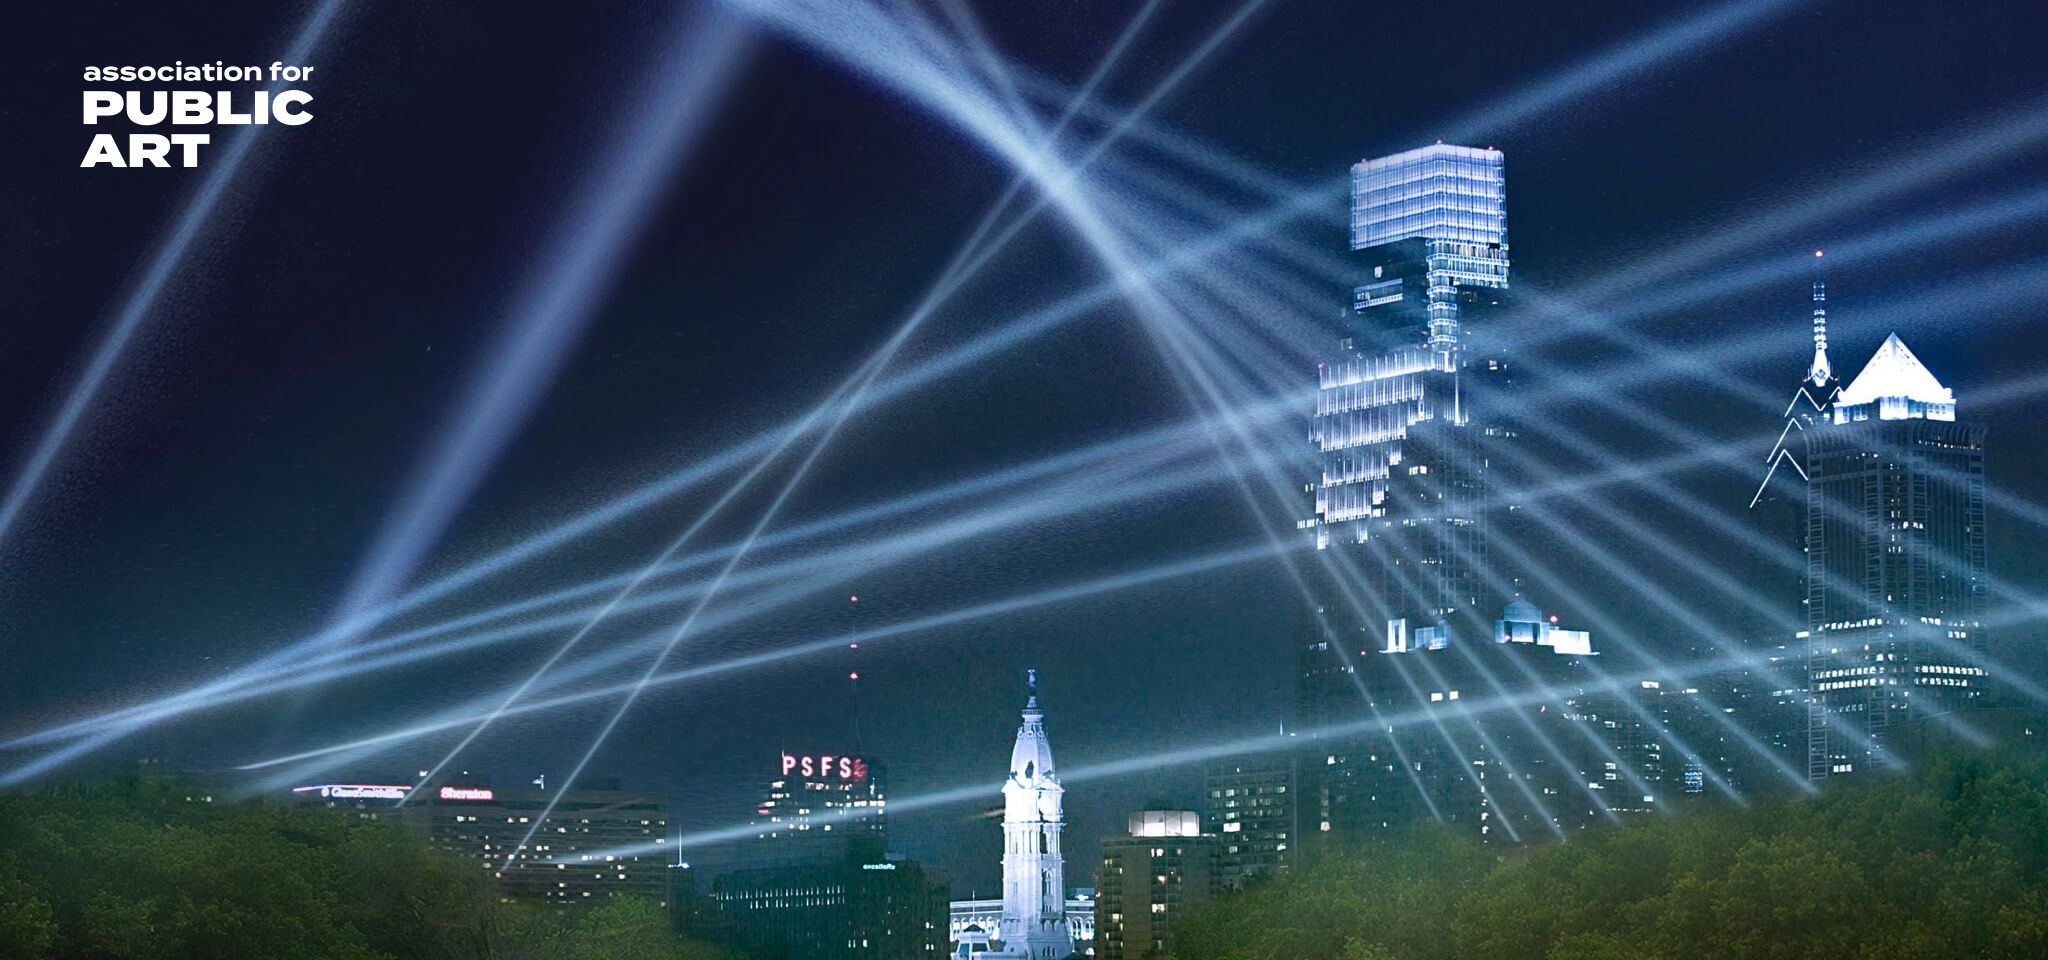 [One-of-a-kind light show featuring 24 robotic searchlights creating a light sculpture in the night sky over Philadelphia’s renowned museum parkway